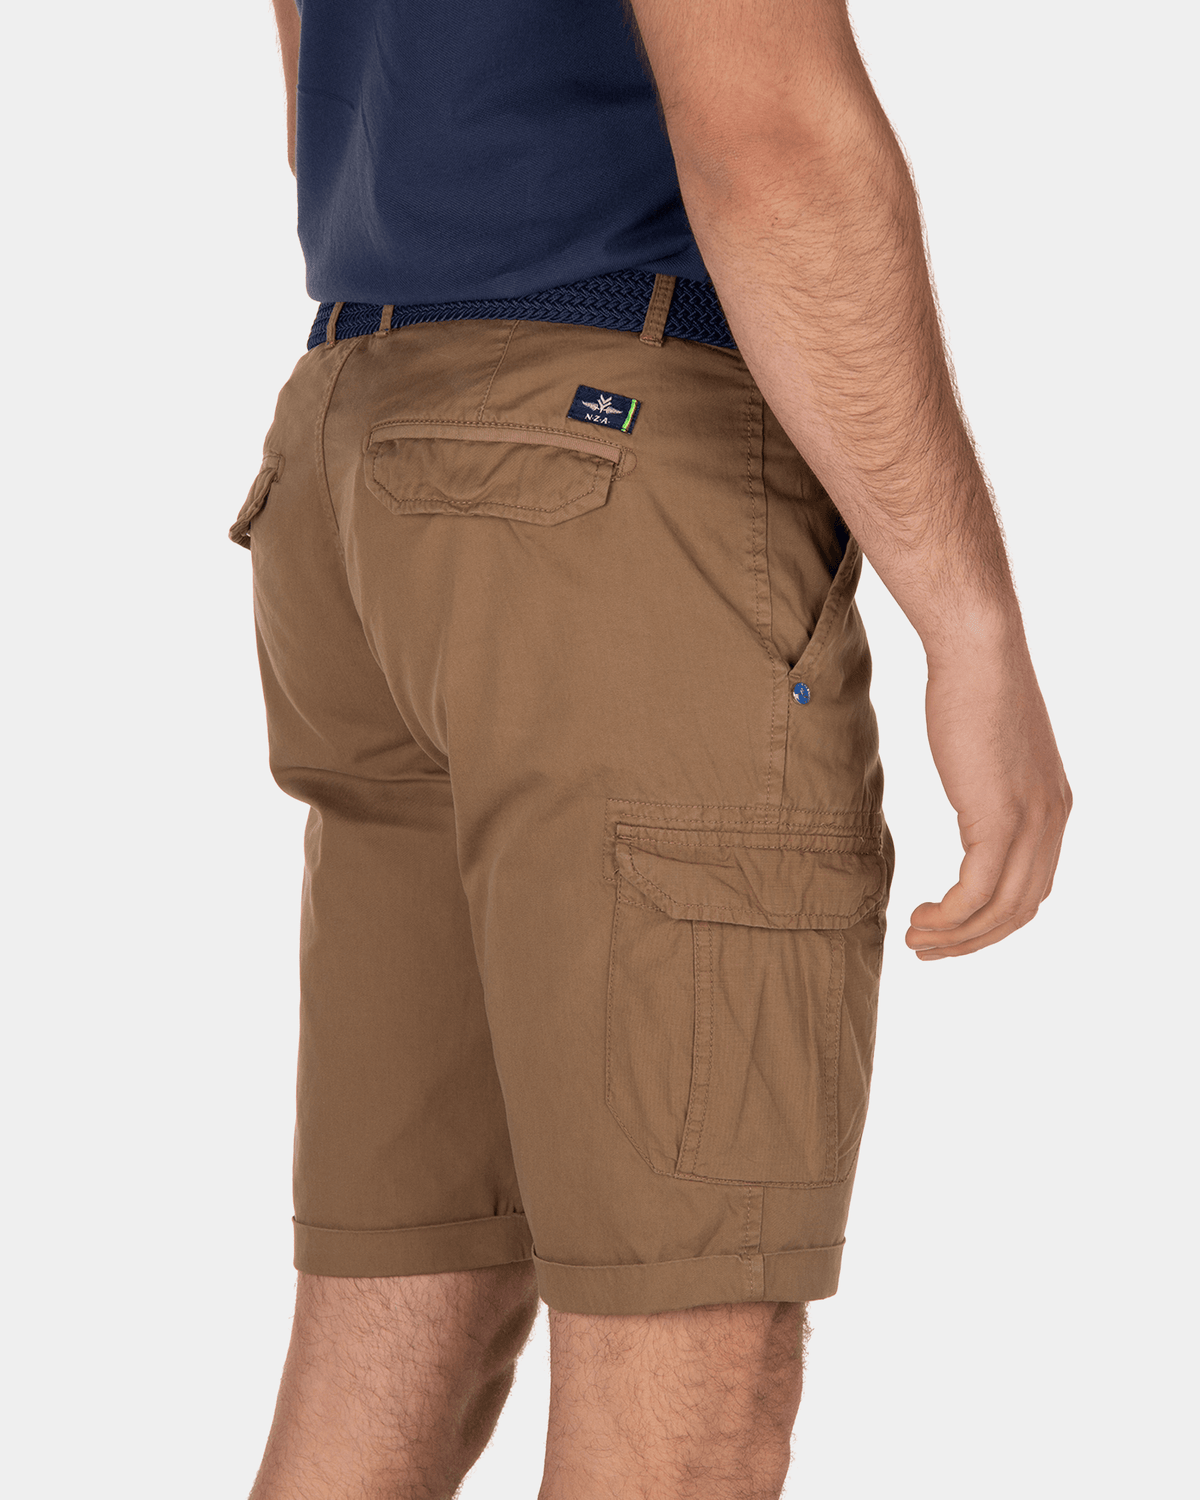 Larry Bay cargo shorts - Tobacco Brown